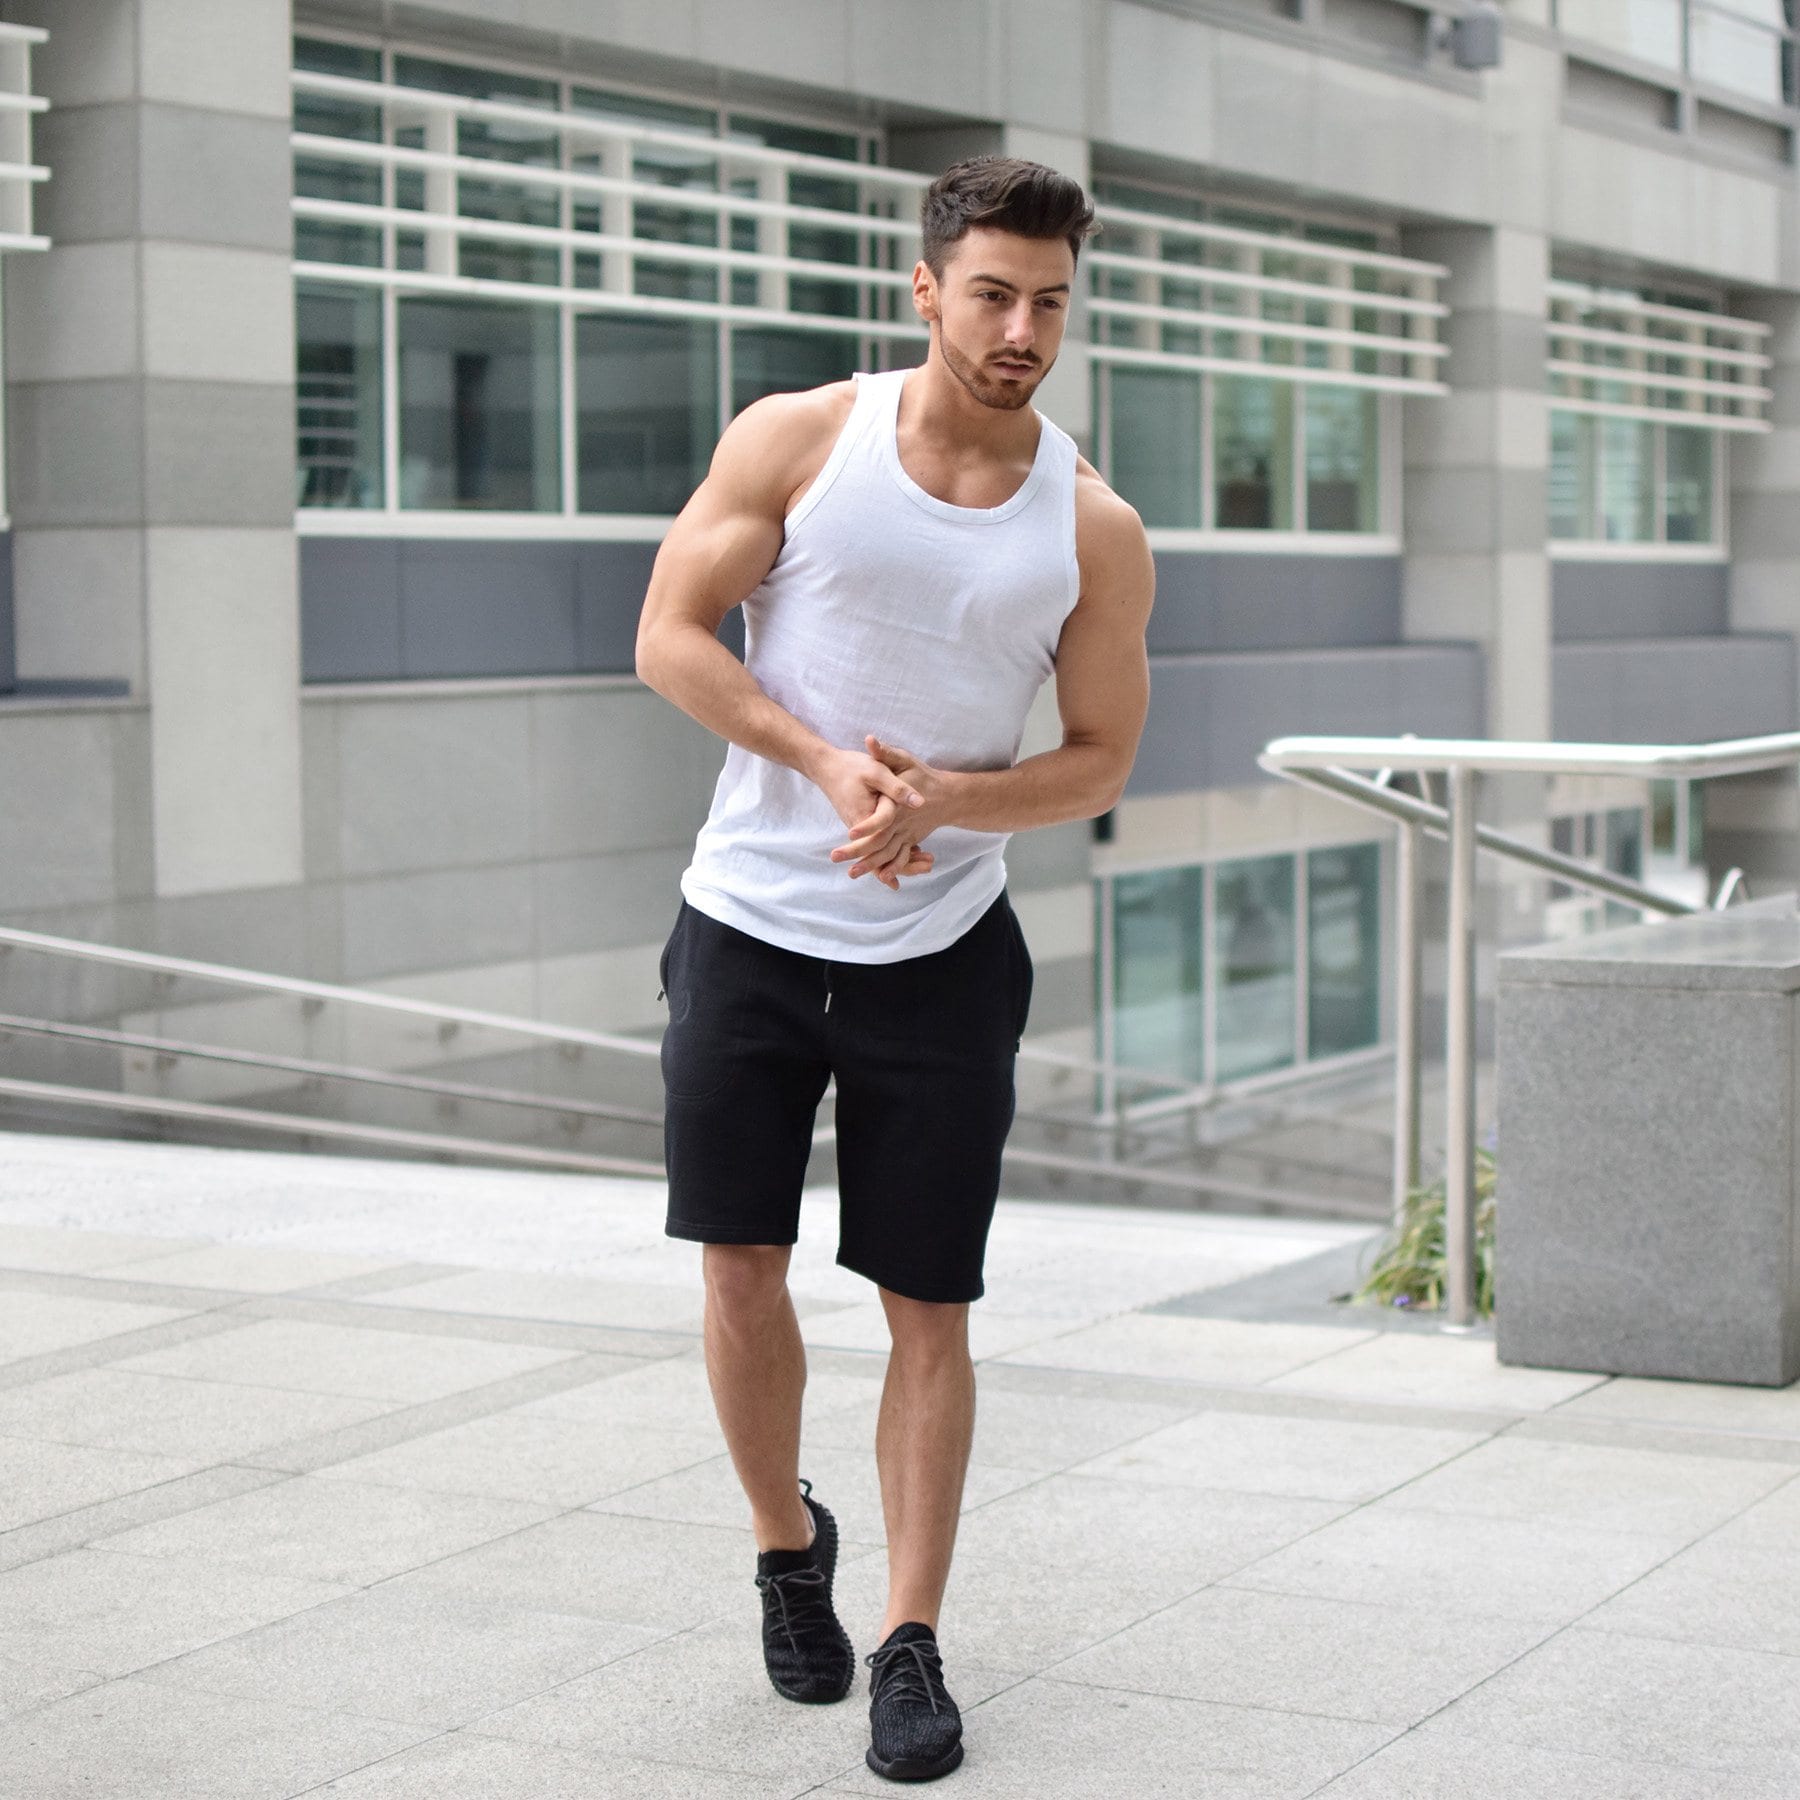  Boys Workout Clothes for Fat Body